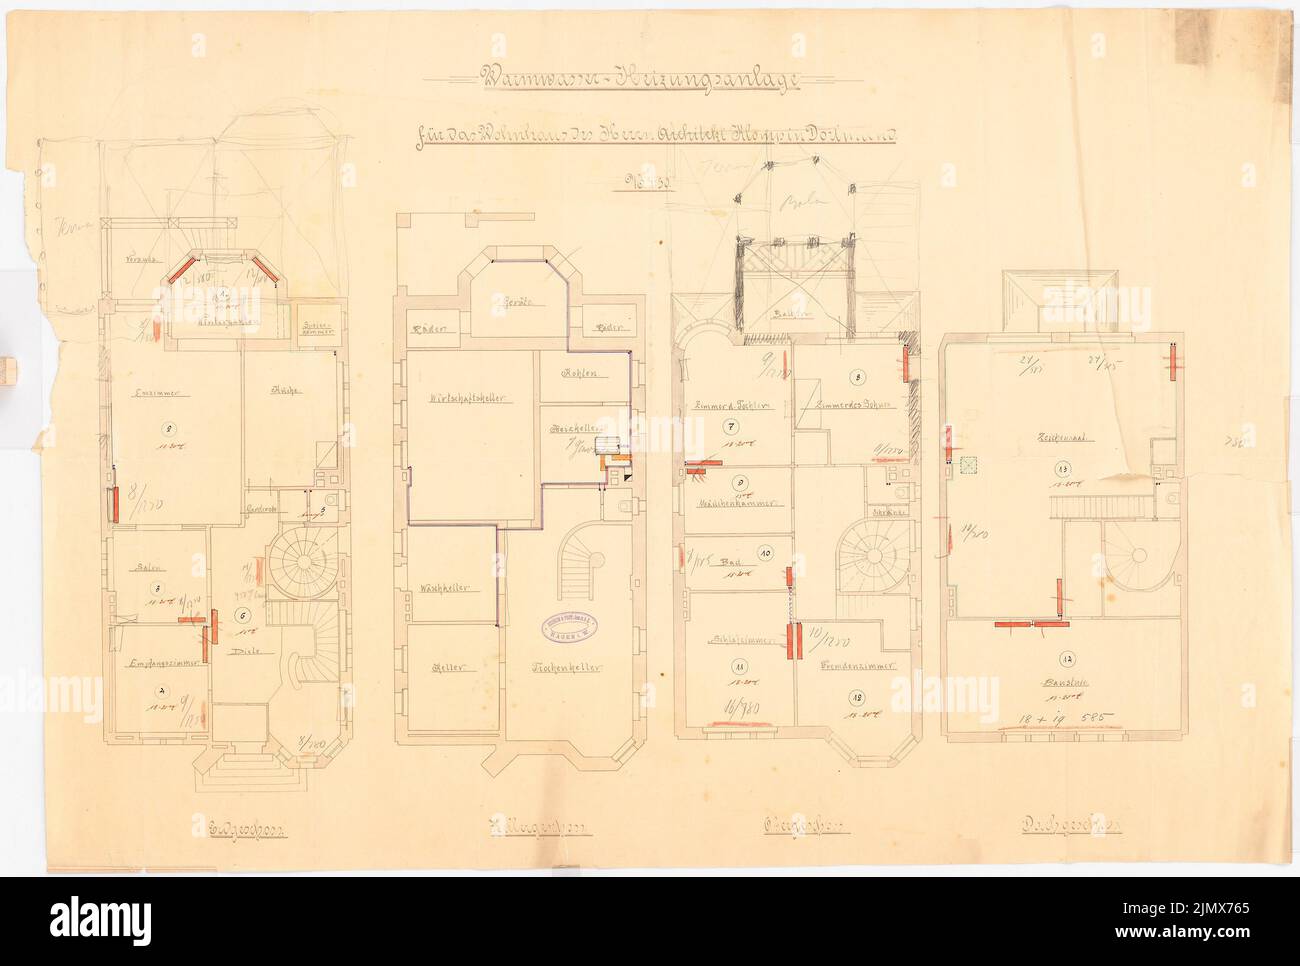 Klomp Johannes Franziskus (1865-1946), Klomp, Dortmund (1904-1905): floor plans with drawings of the hot water heating system 1:50. Ink, pencil, colored pencil, ink colored, watercolored, over a break on paper, 65 x 96.4 cm (including scan edges) Klomp Johannes Franziskus  (1865-1946): Wohnhaus Klomp, Dortmund Stock Photo